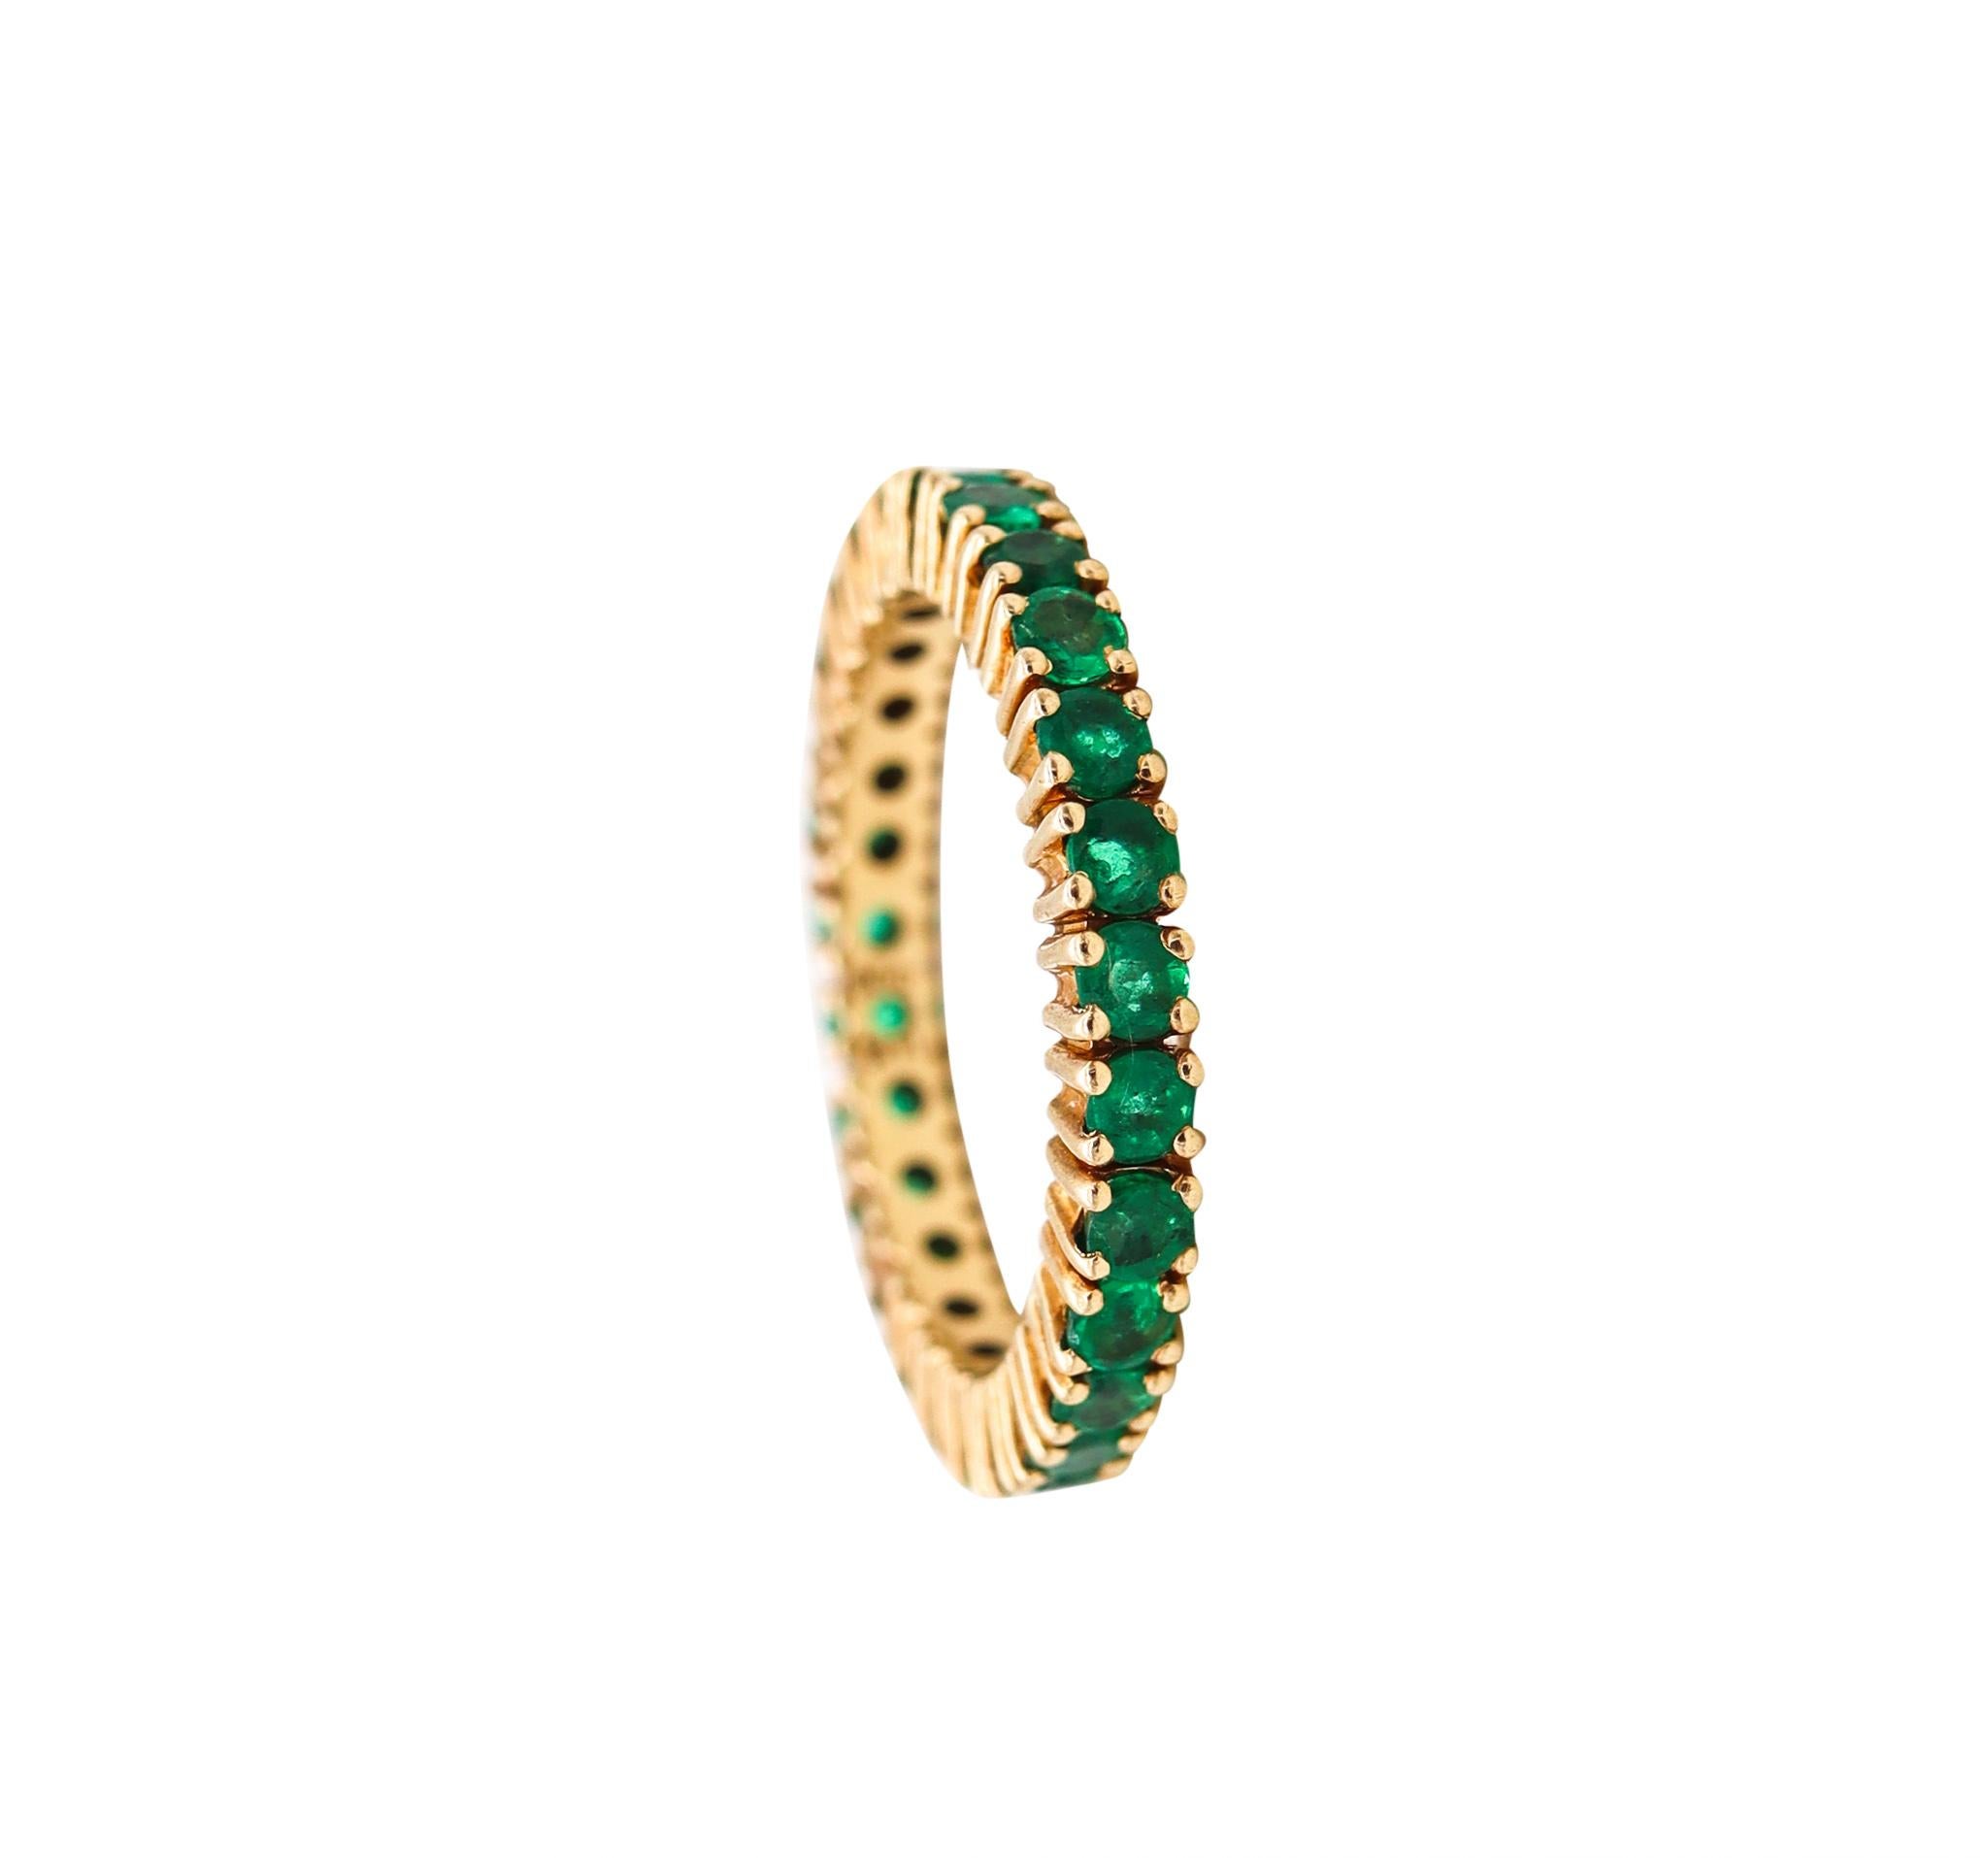 Eternity ring with Colombian Emeralds.

A modern full band carefully crafted in solid yellow gold of 14 karats, with high polished finish. It is mounted in a prongs setting, with 27 calibrated round cuts of Colombian Green emeralds

The gemstones